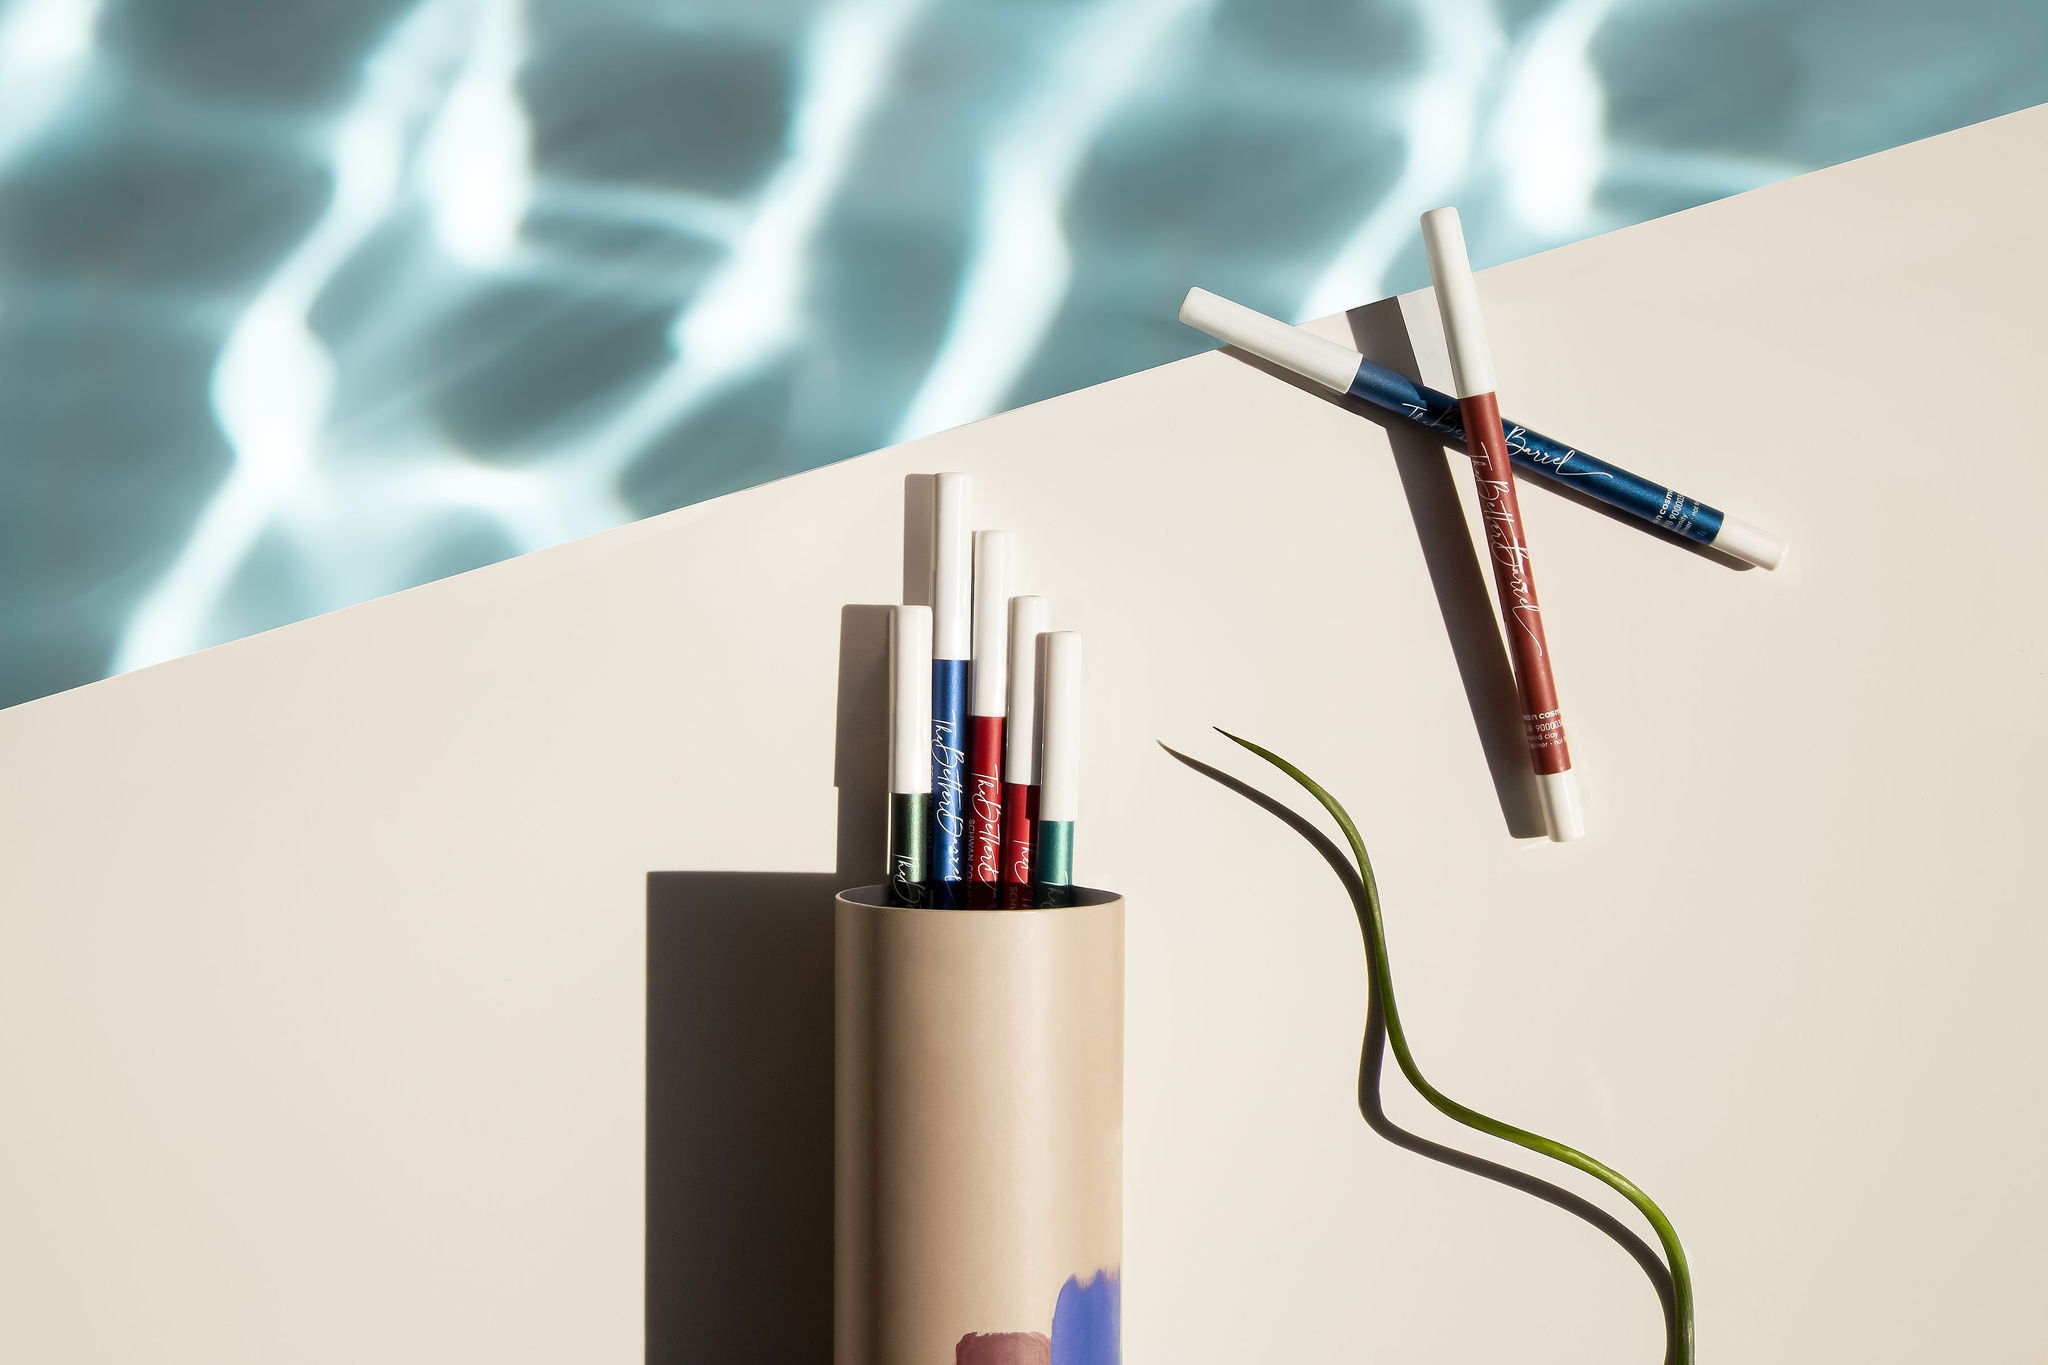 Schwan Cosmetics’s color cosmetic pencils made with sustainable Sulapac materials, ‘TheBetterBarrel’.